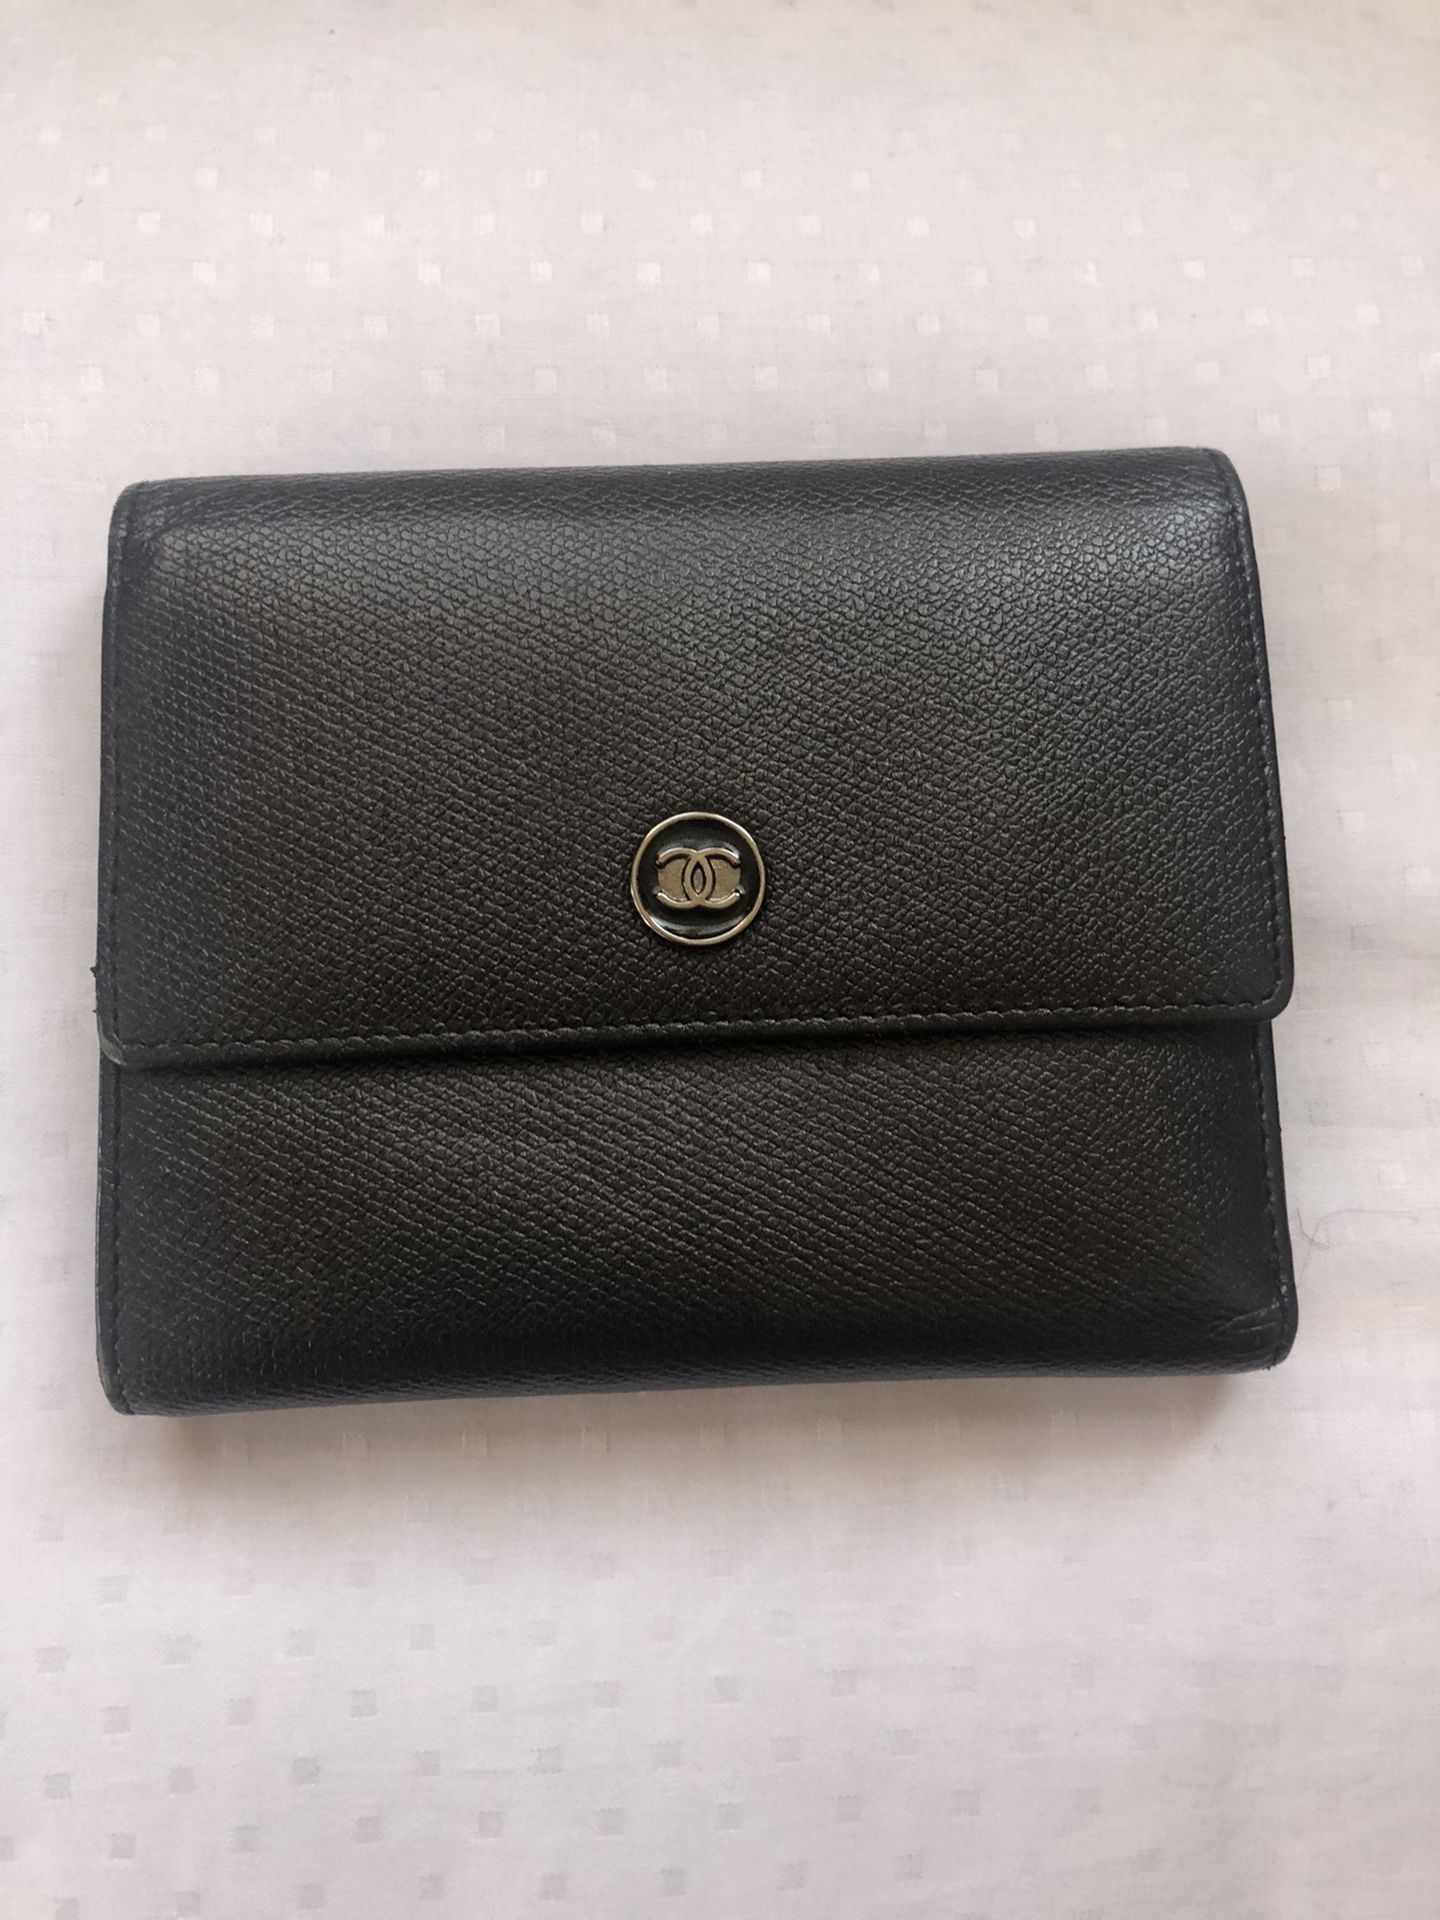 Authentic CHANEL trifold wallet